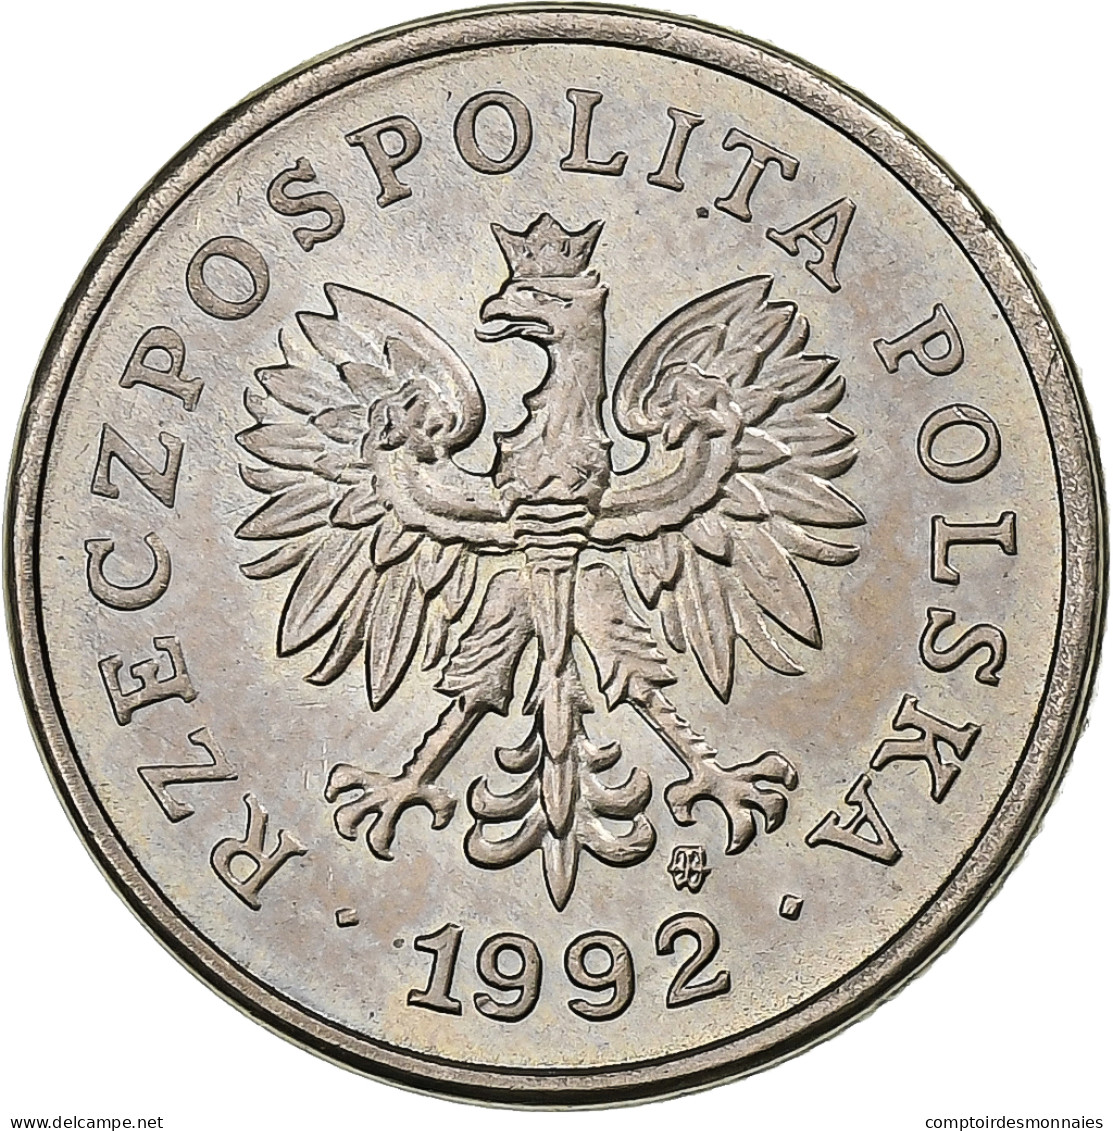 Pologne, 20 Groszy, 1992, Warsaw, Cupro-nickel, SUP, KM:280 - Pologne